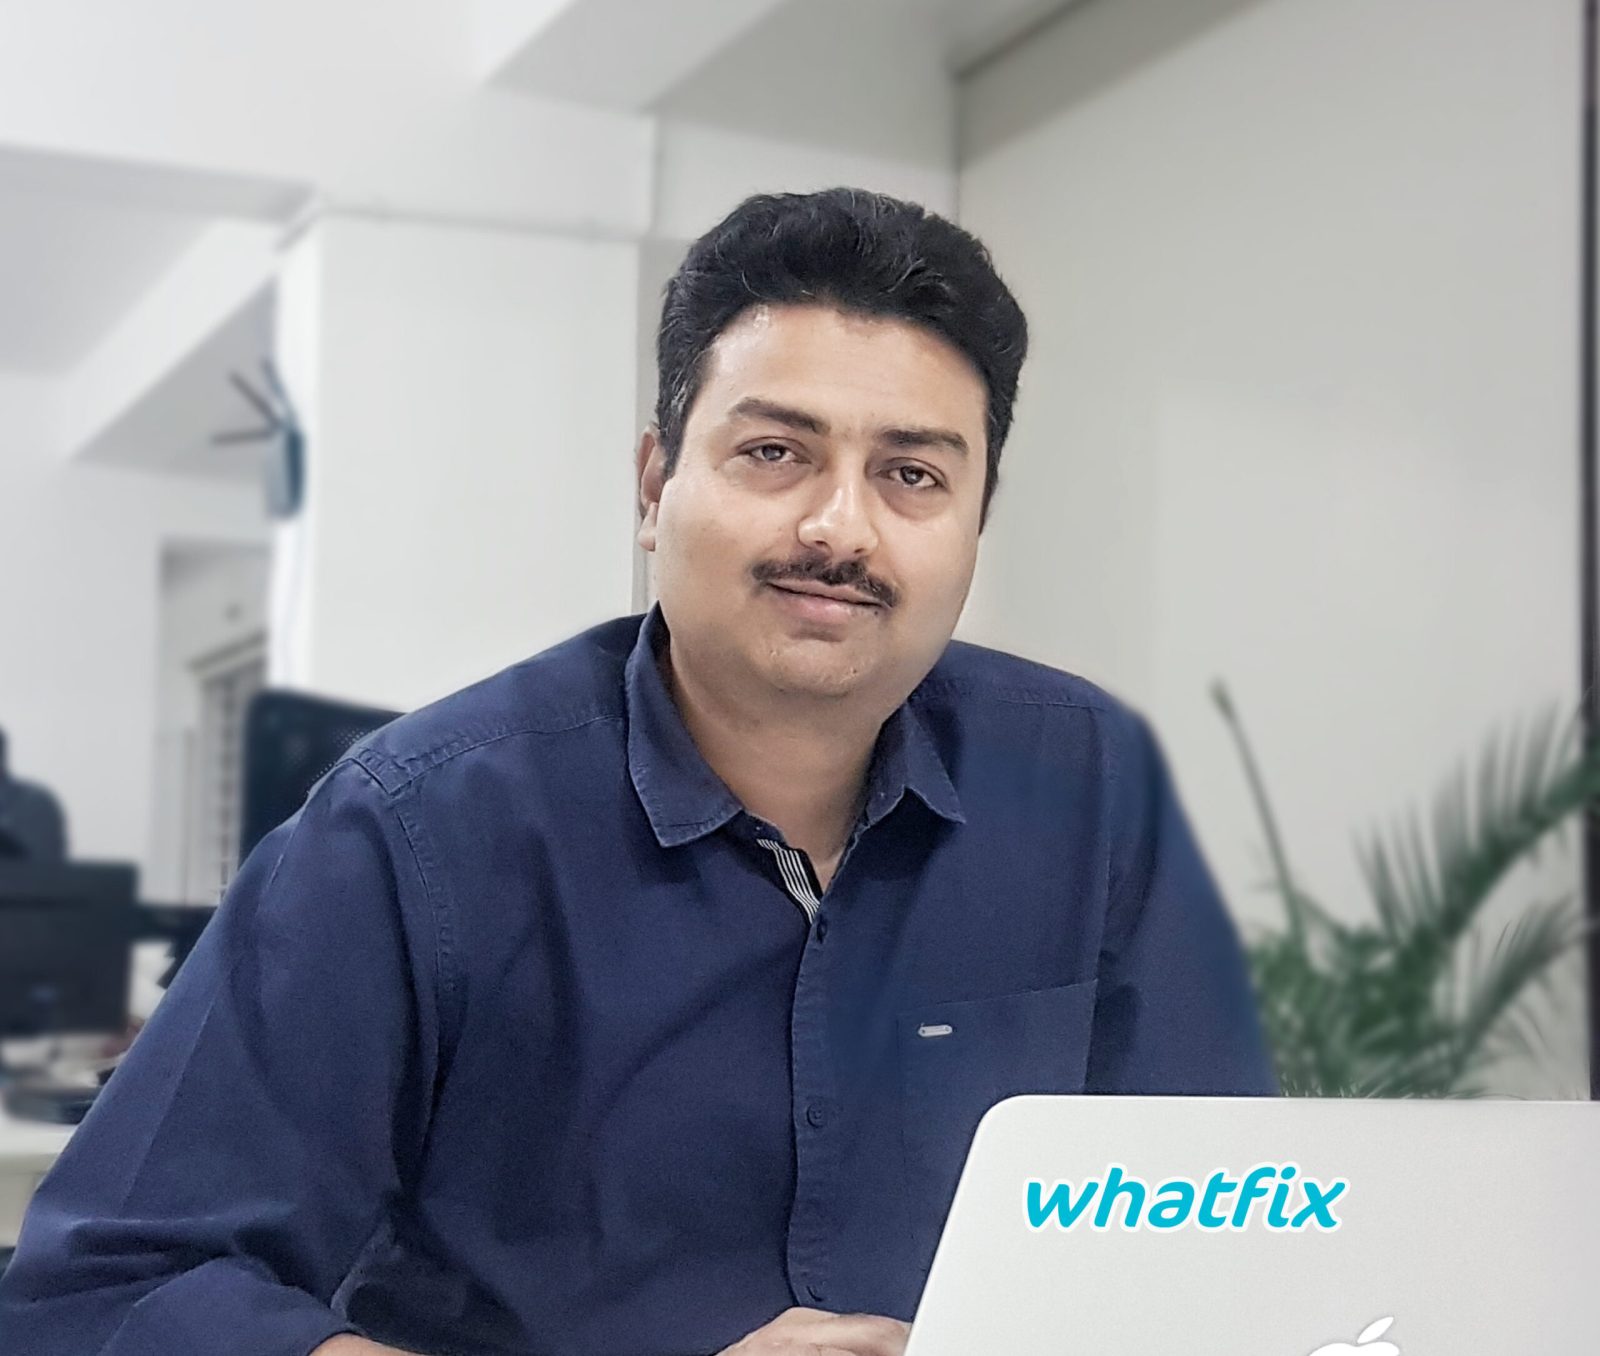 How Whatfix evolved its pricing and go-to-market strategy